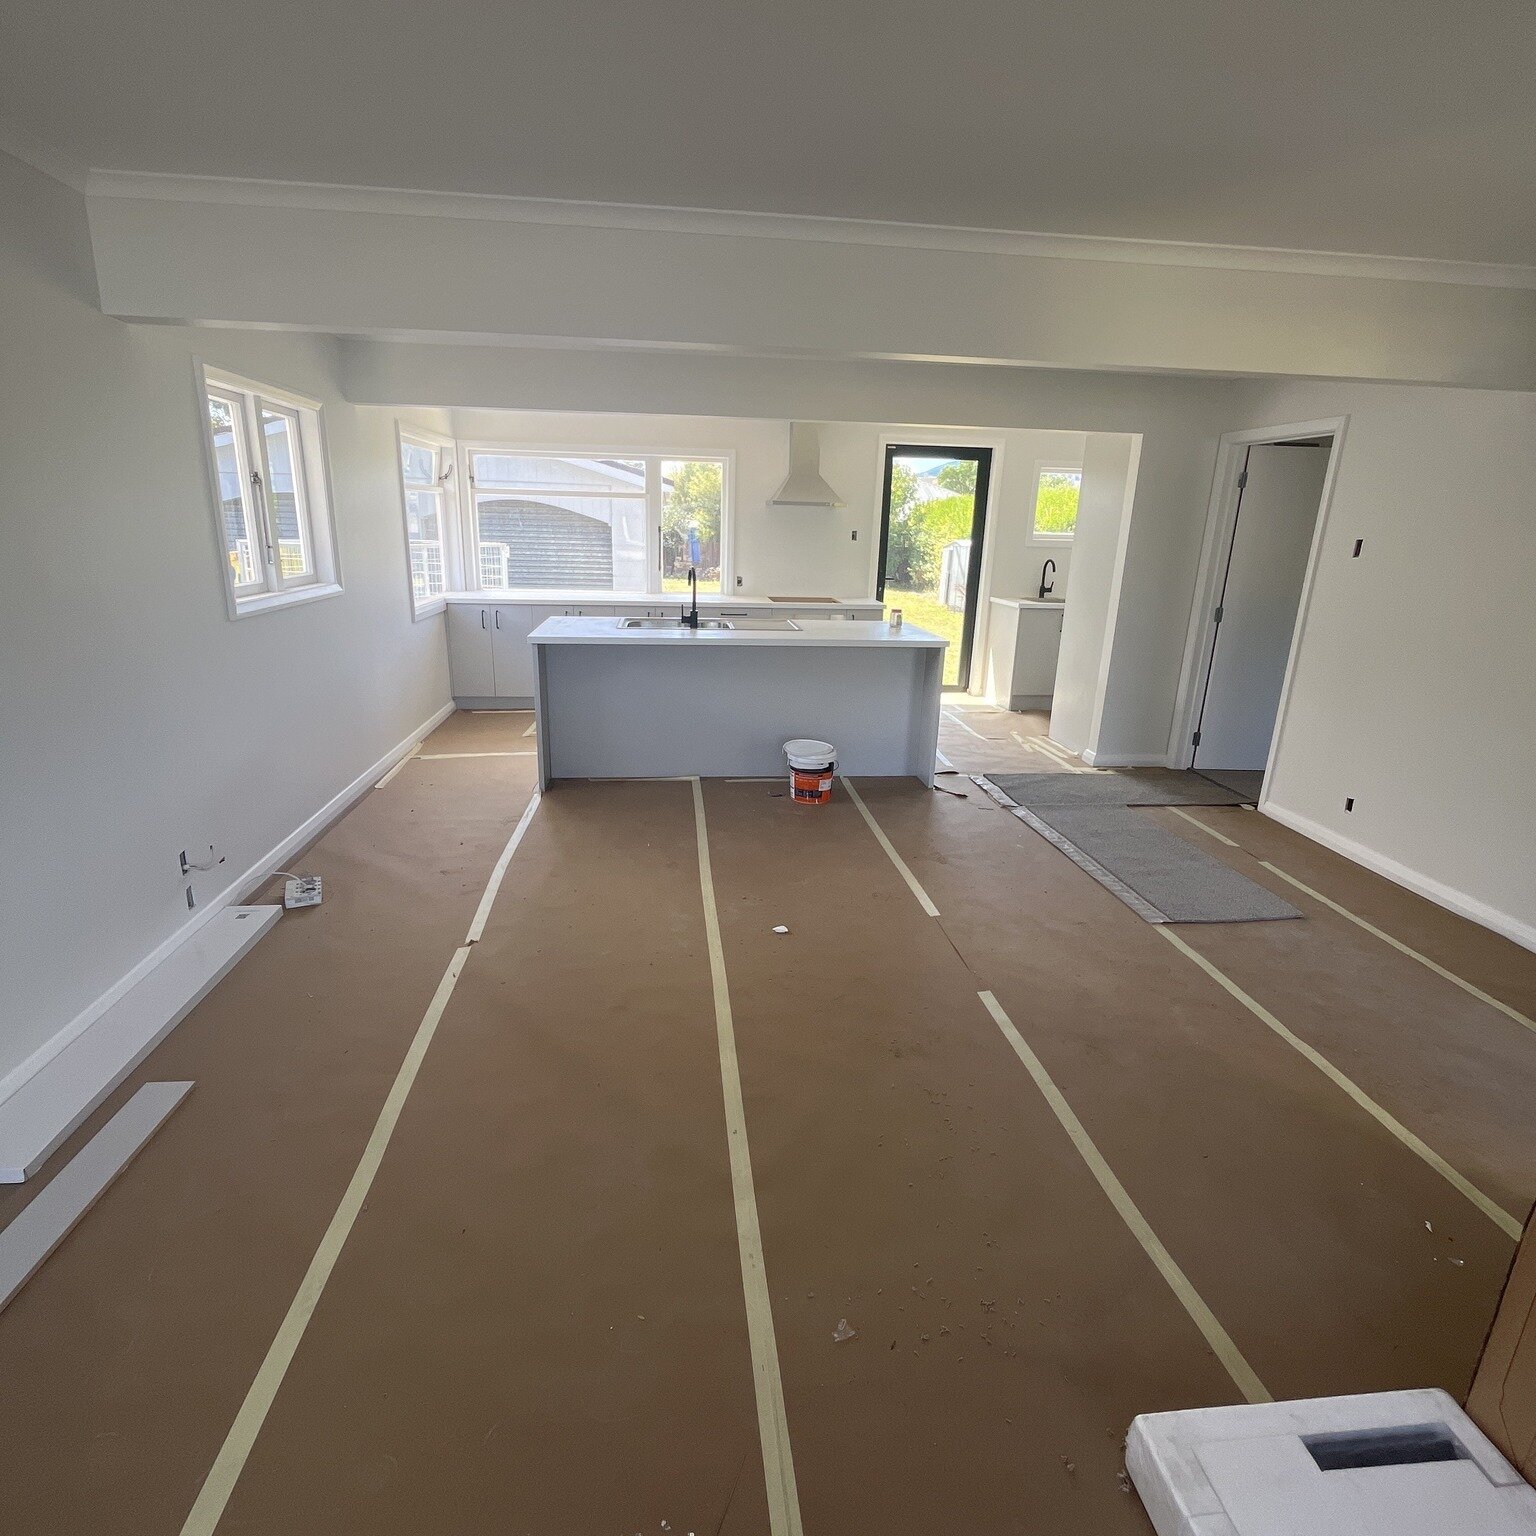 Our Sutton Street renovation is nearing completion! The new kitchen, floor coverings and plumbing fittings are in as well as a new carpet 😍 Exterior painting still needs to be done but we are on the home stretch! 🥳